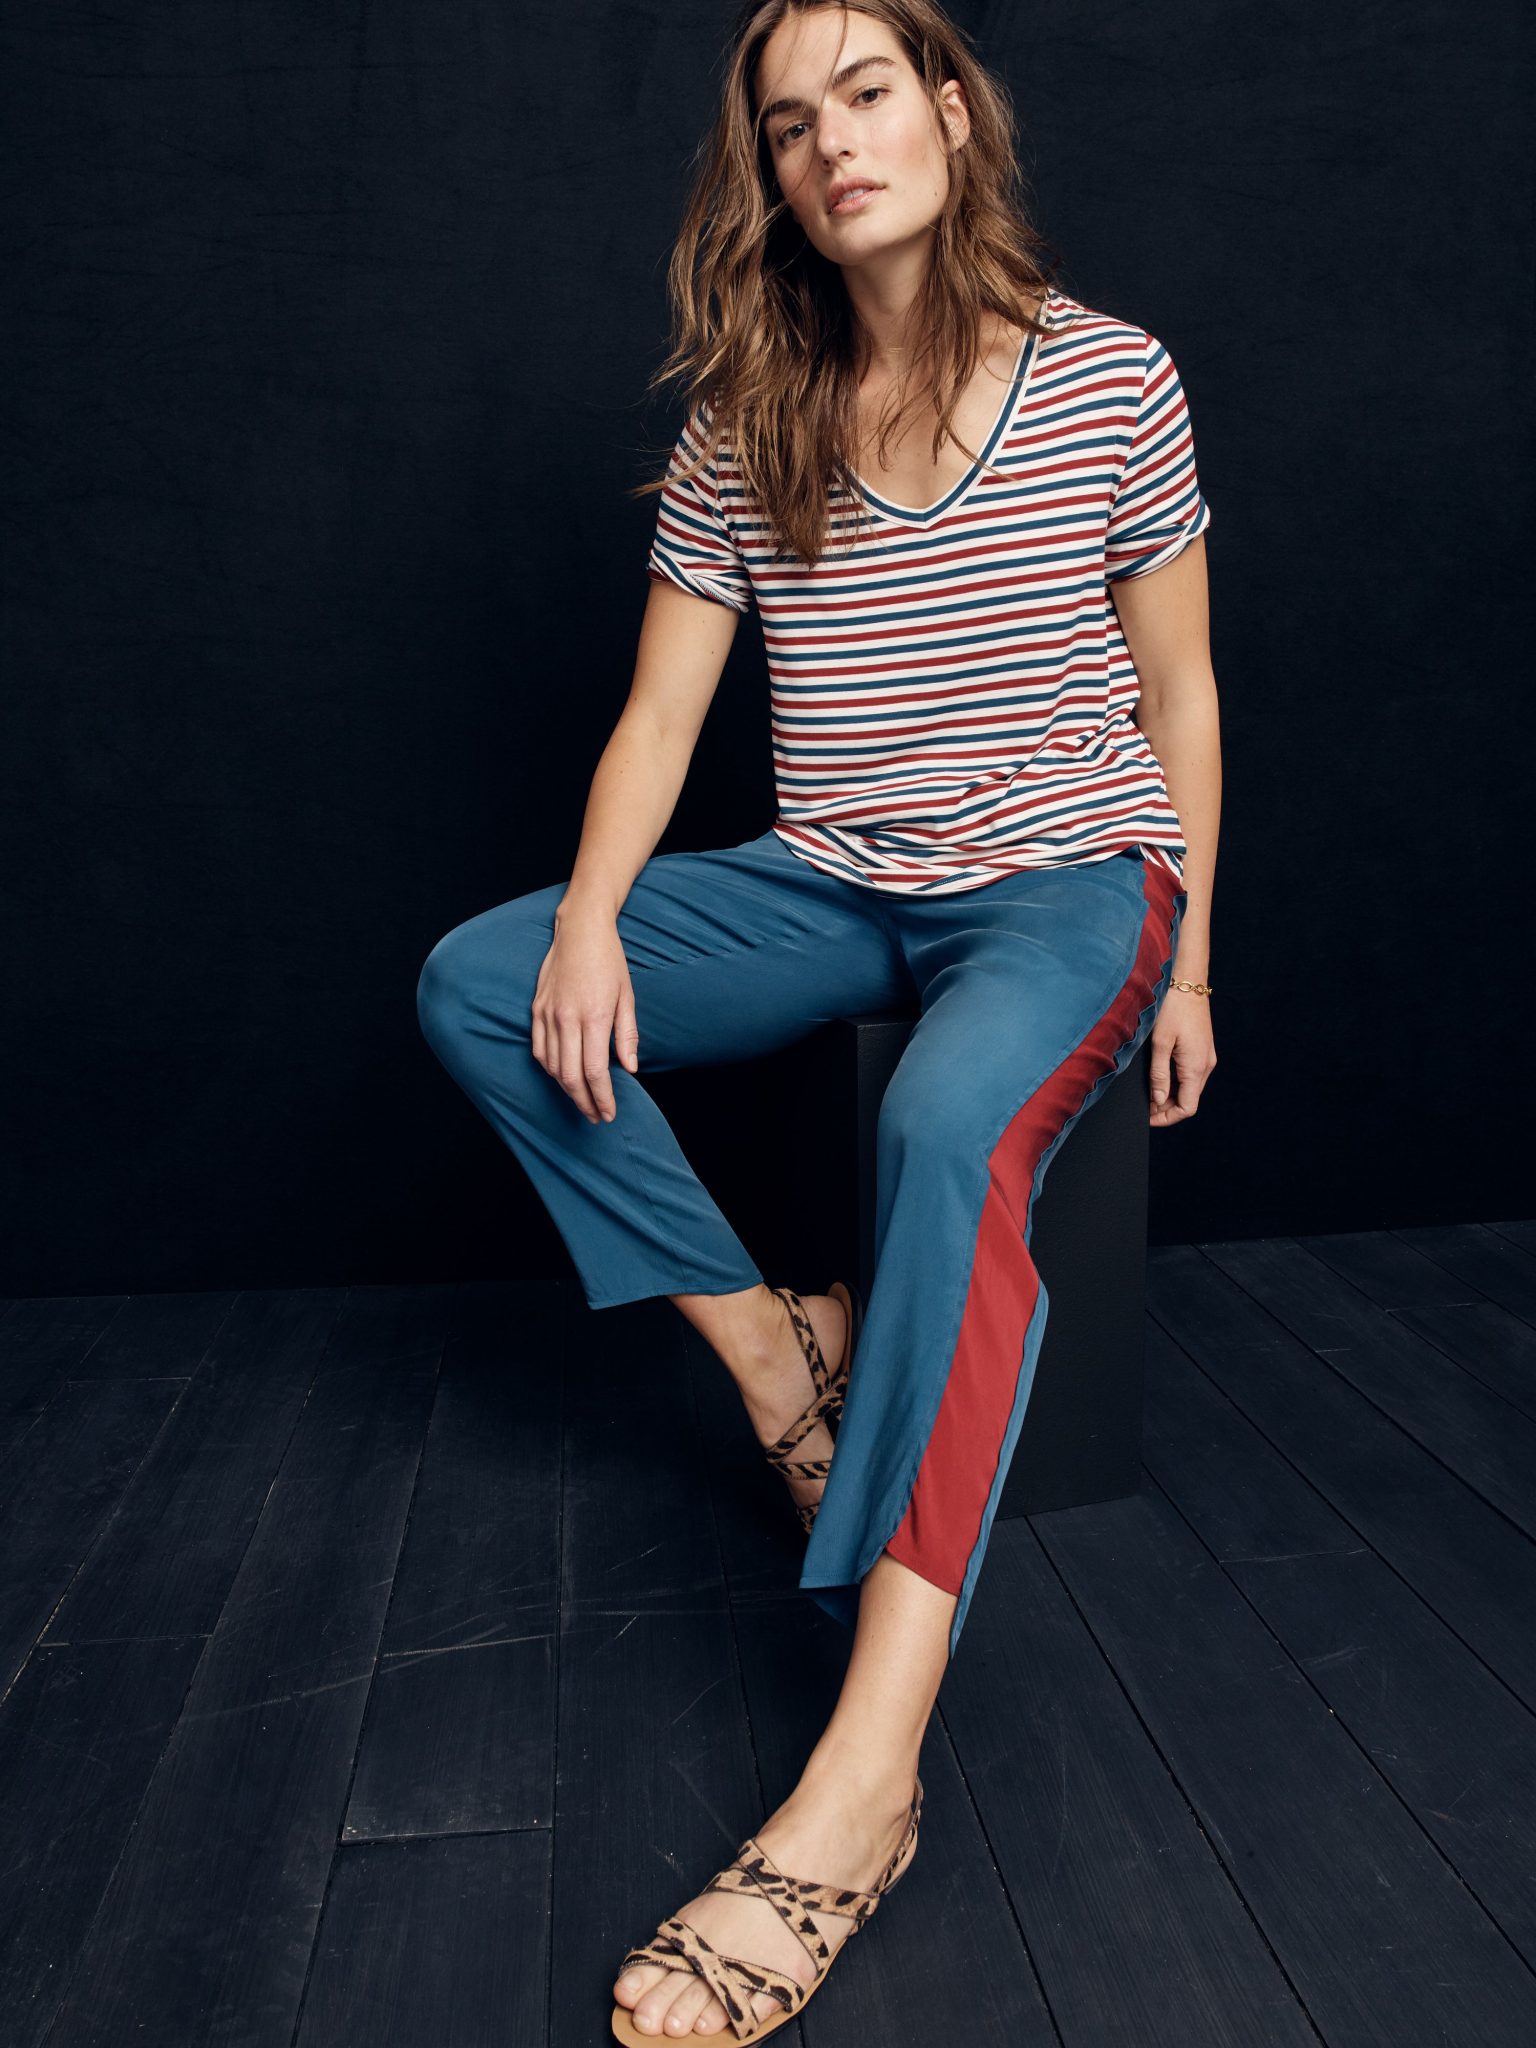 it’s happening! j.crew is finally introducing plus sizing